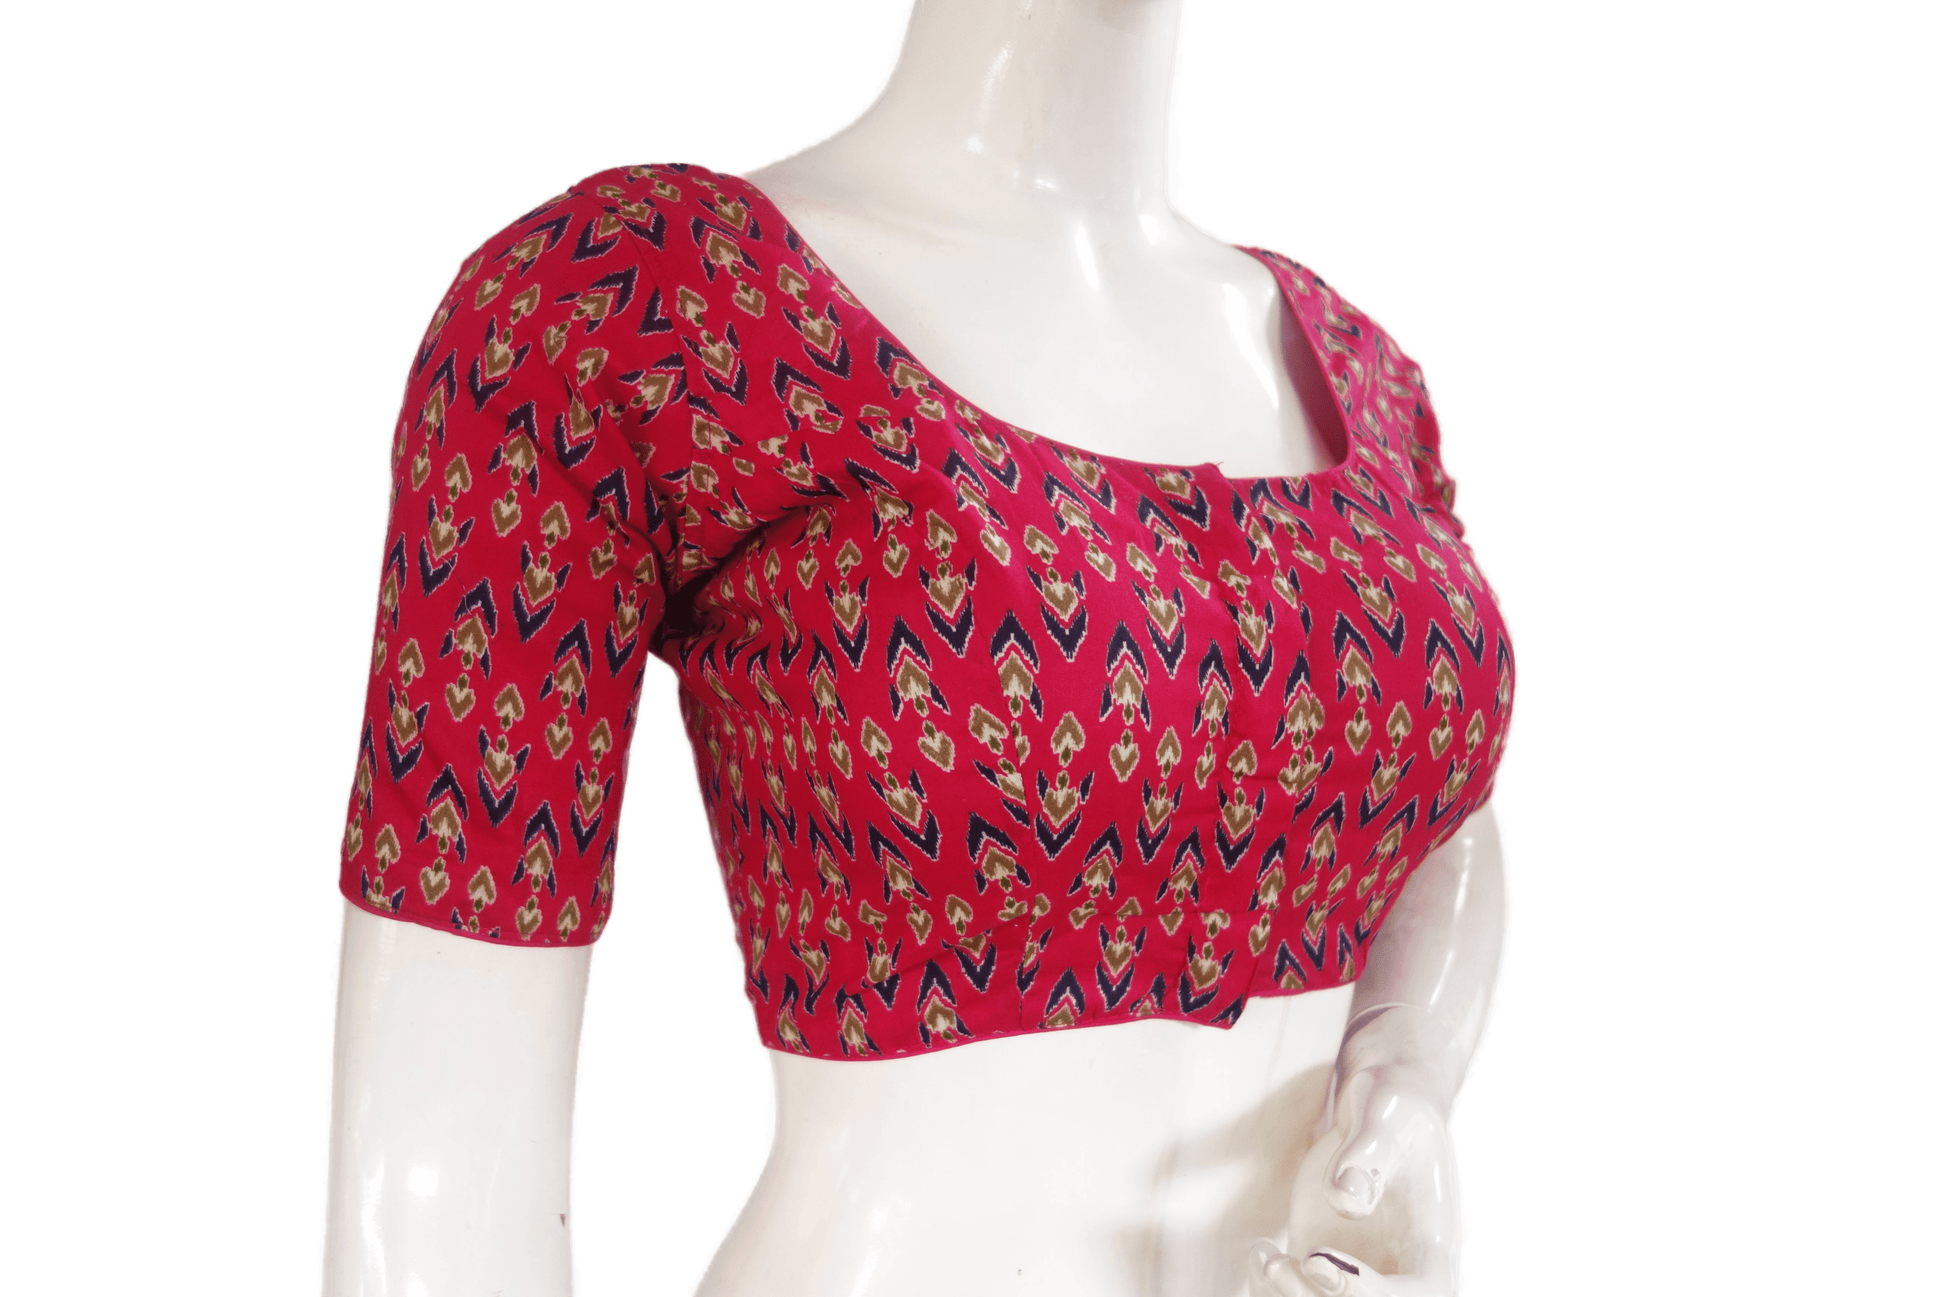 Dark Pink Color Cotton Printed Readymade Saree Blouse - D3blouses